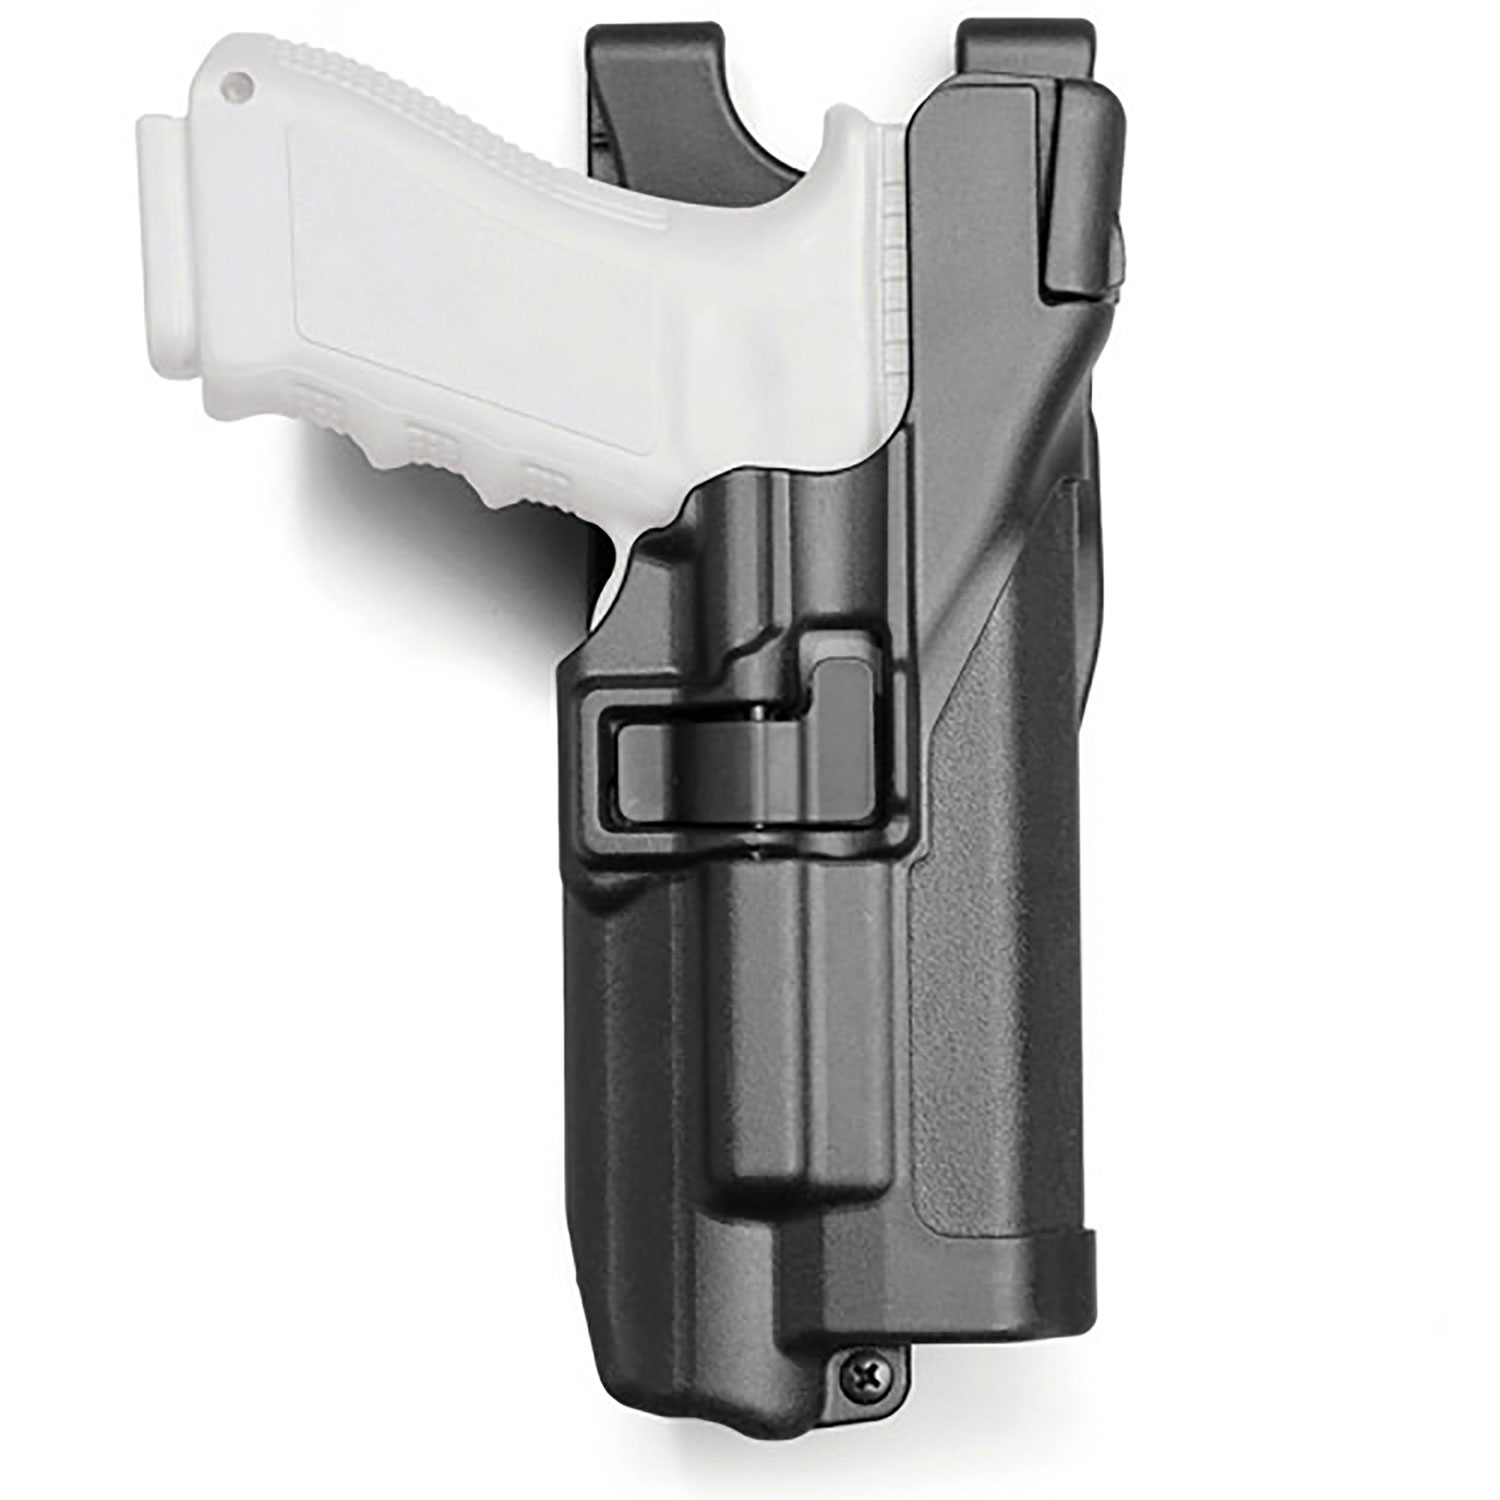 BLACKHAWK SERPA Level III Light Bearing Holster At Patriot Outfitters